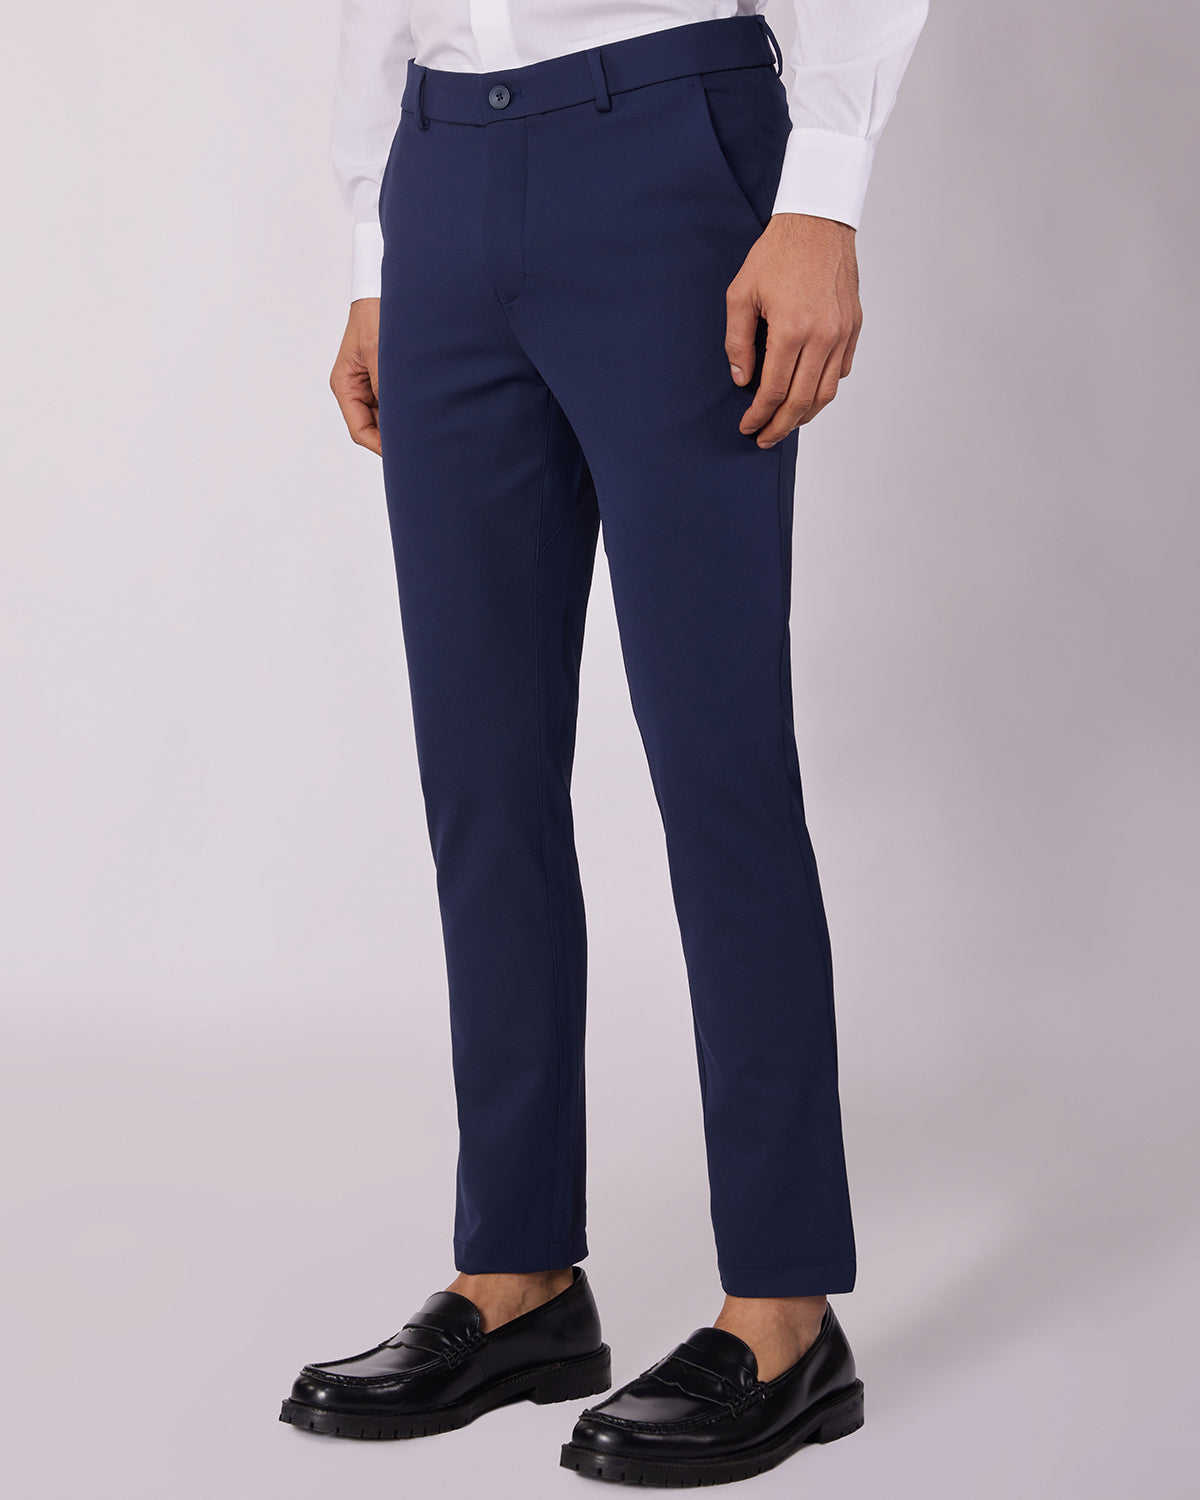 Mlada | Buy Women's Trousers and Pants Online